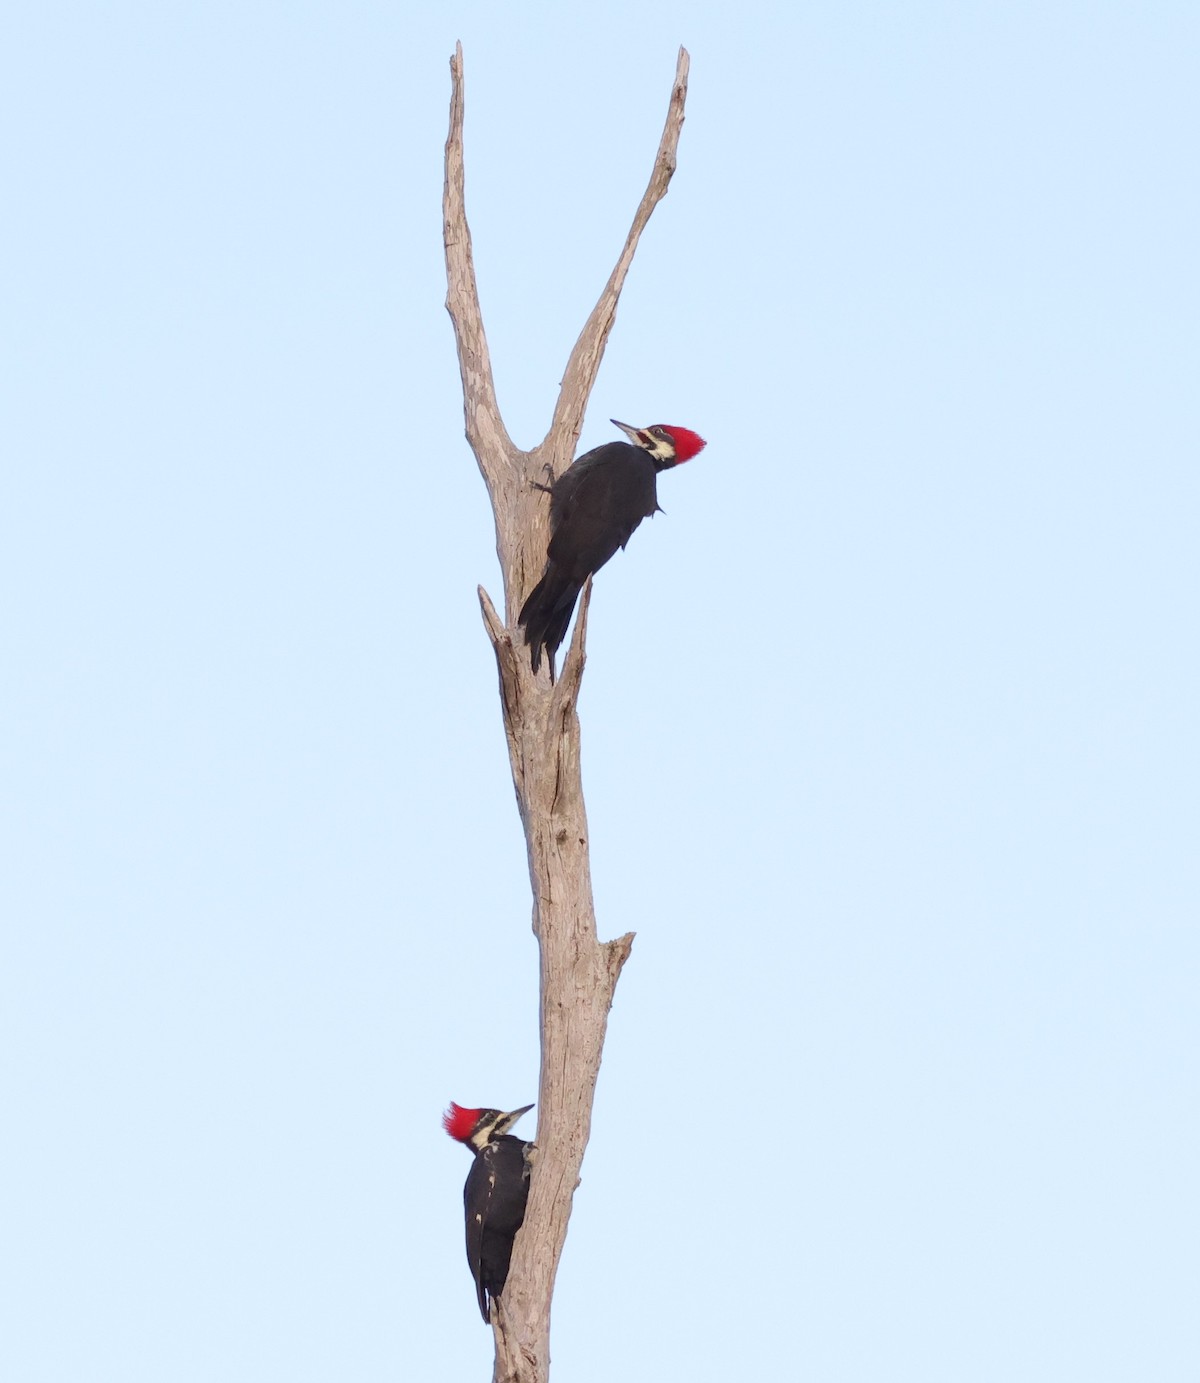 Male and female woodpeckers enjoying morning at the Village of Hammock at Fenney